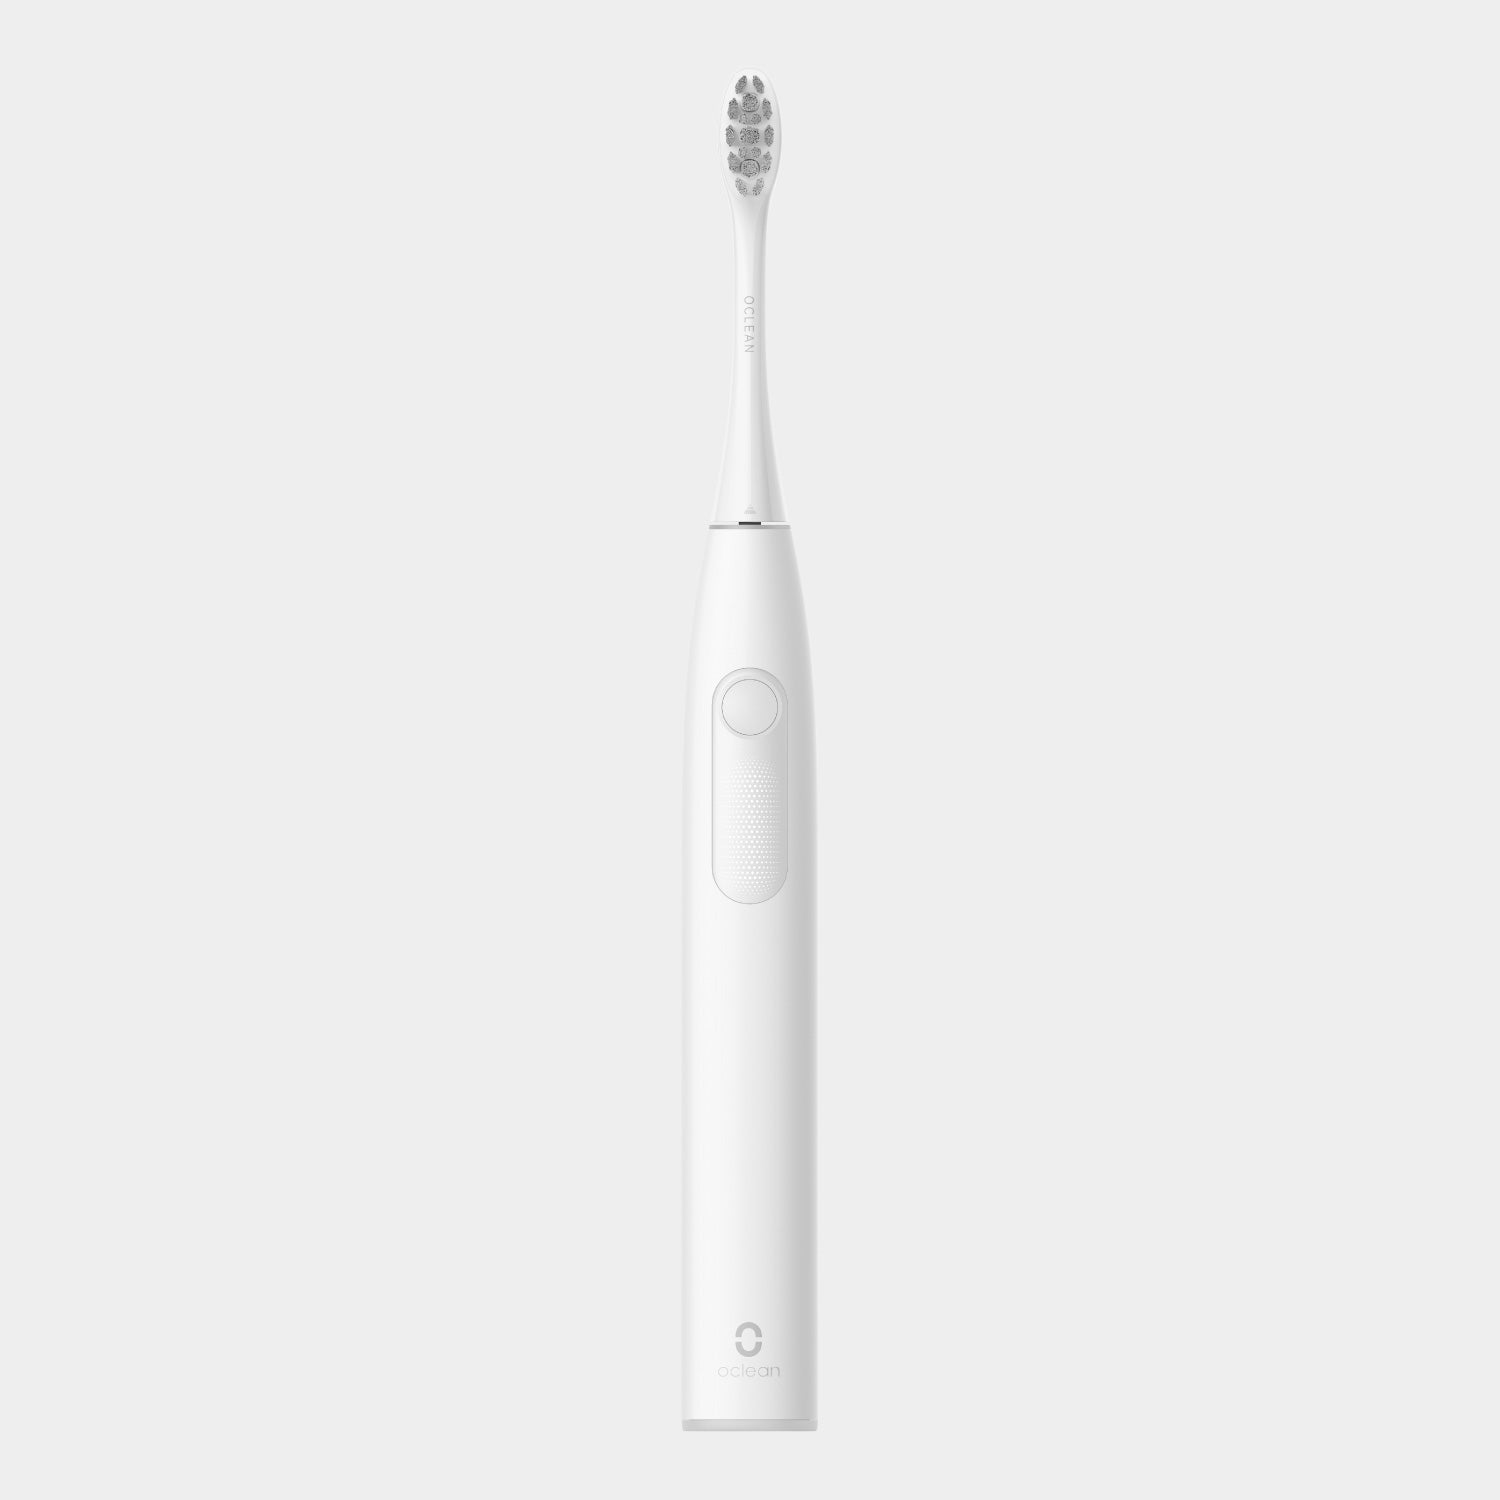 Oclean Z1 Electric Toothbrush-Toothbrushes-Oclean US Store